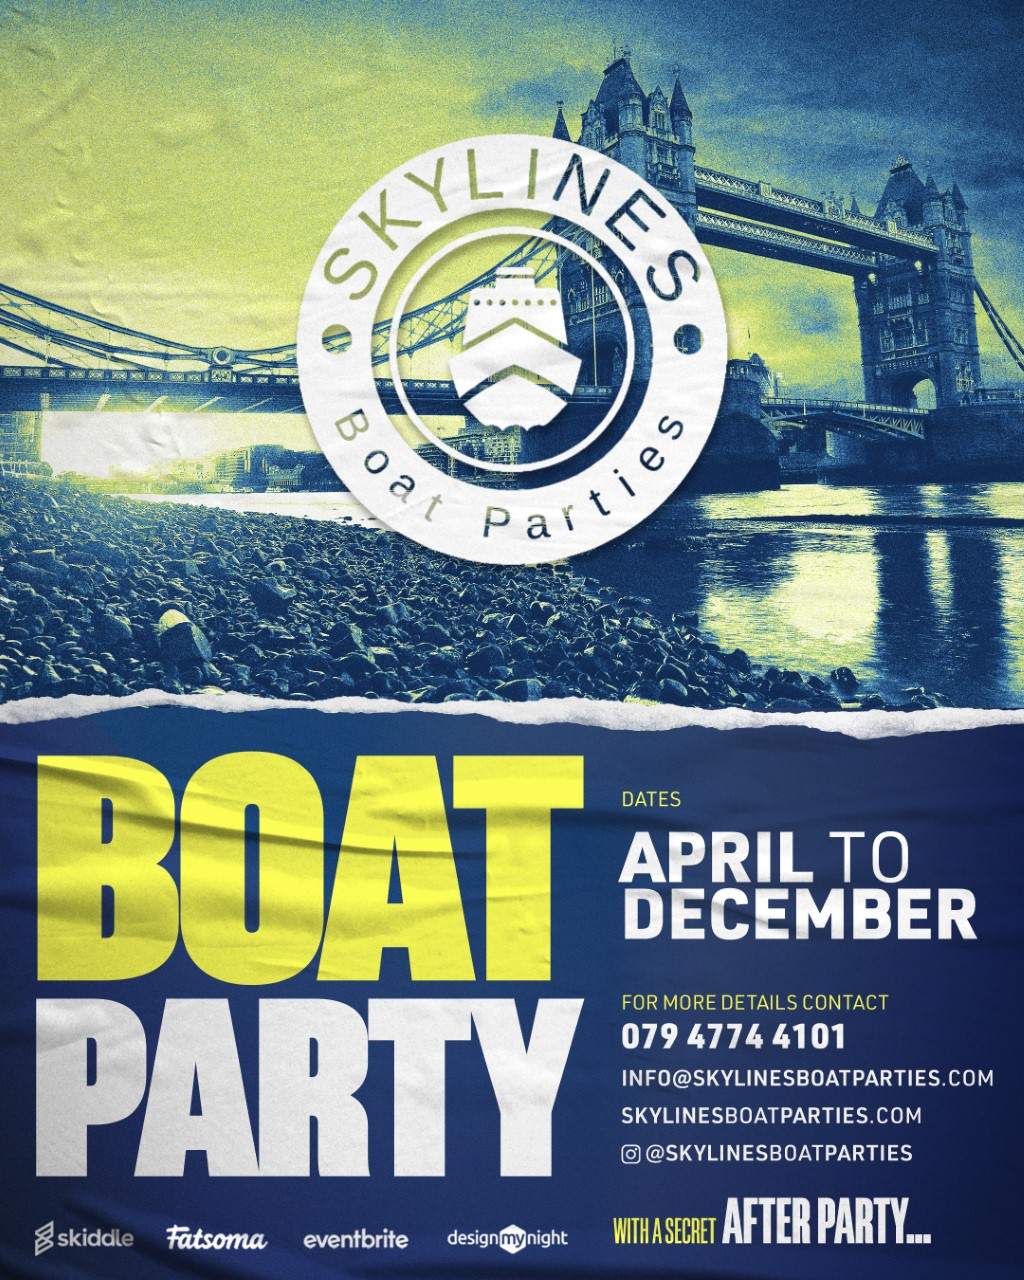 Boat Party with a free after party - フライヤー裏